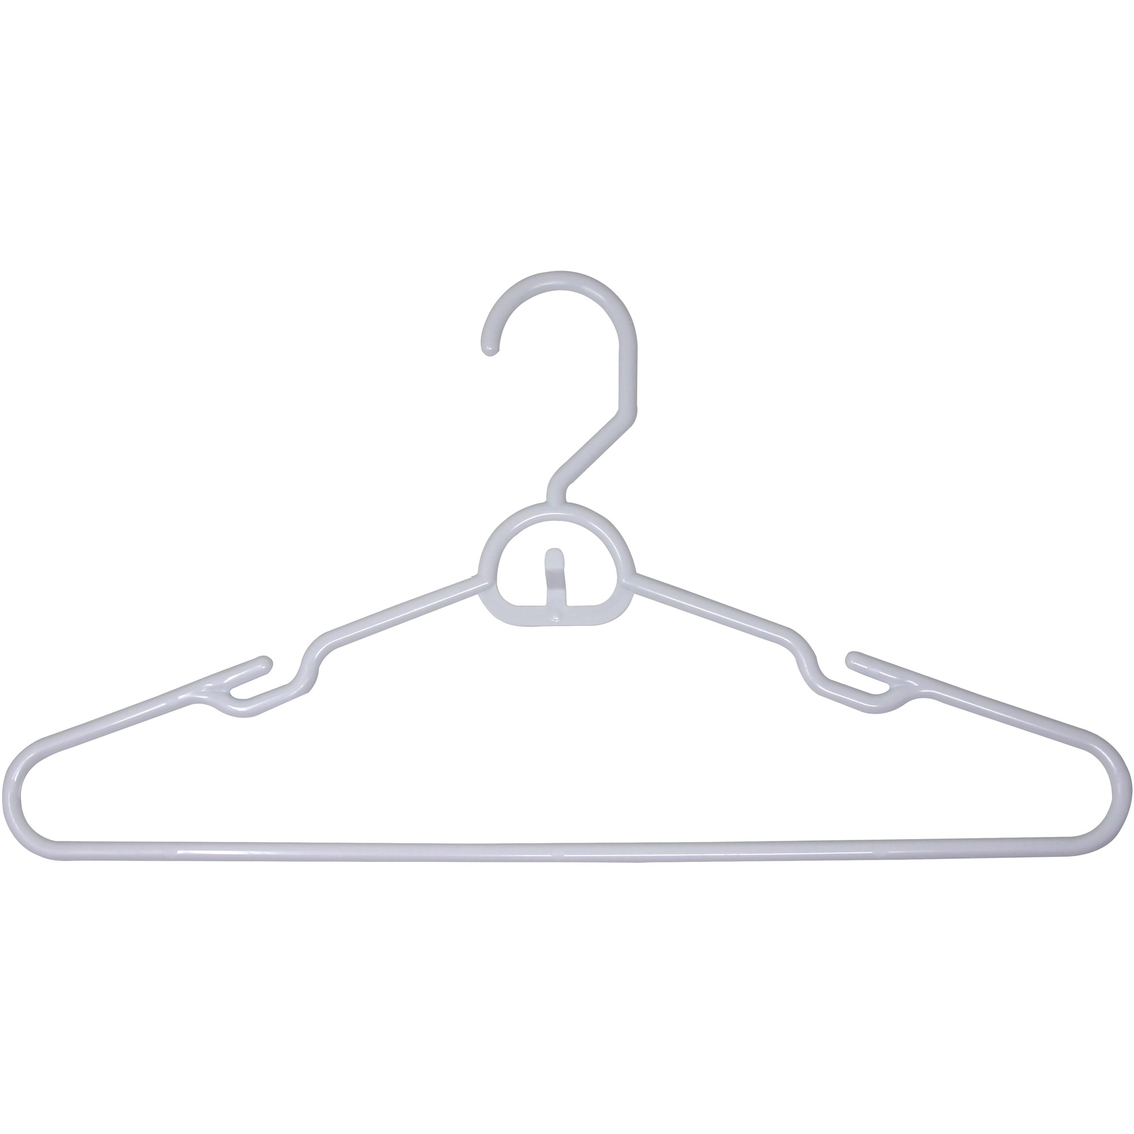 White 8.5inch Children Plastic Cloth Hanger, For Hanging Clothes